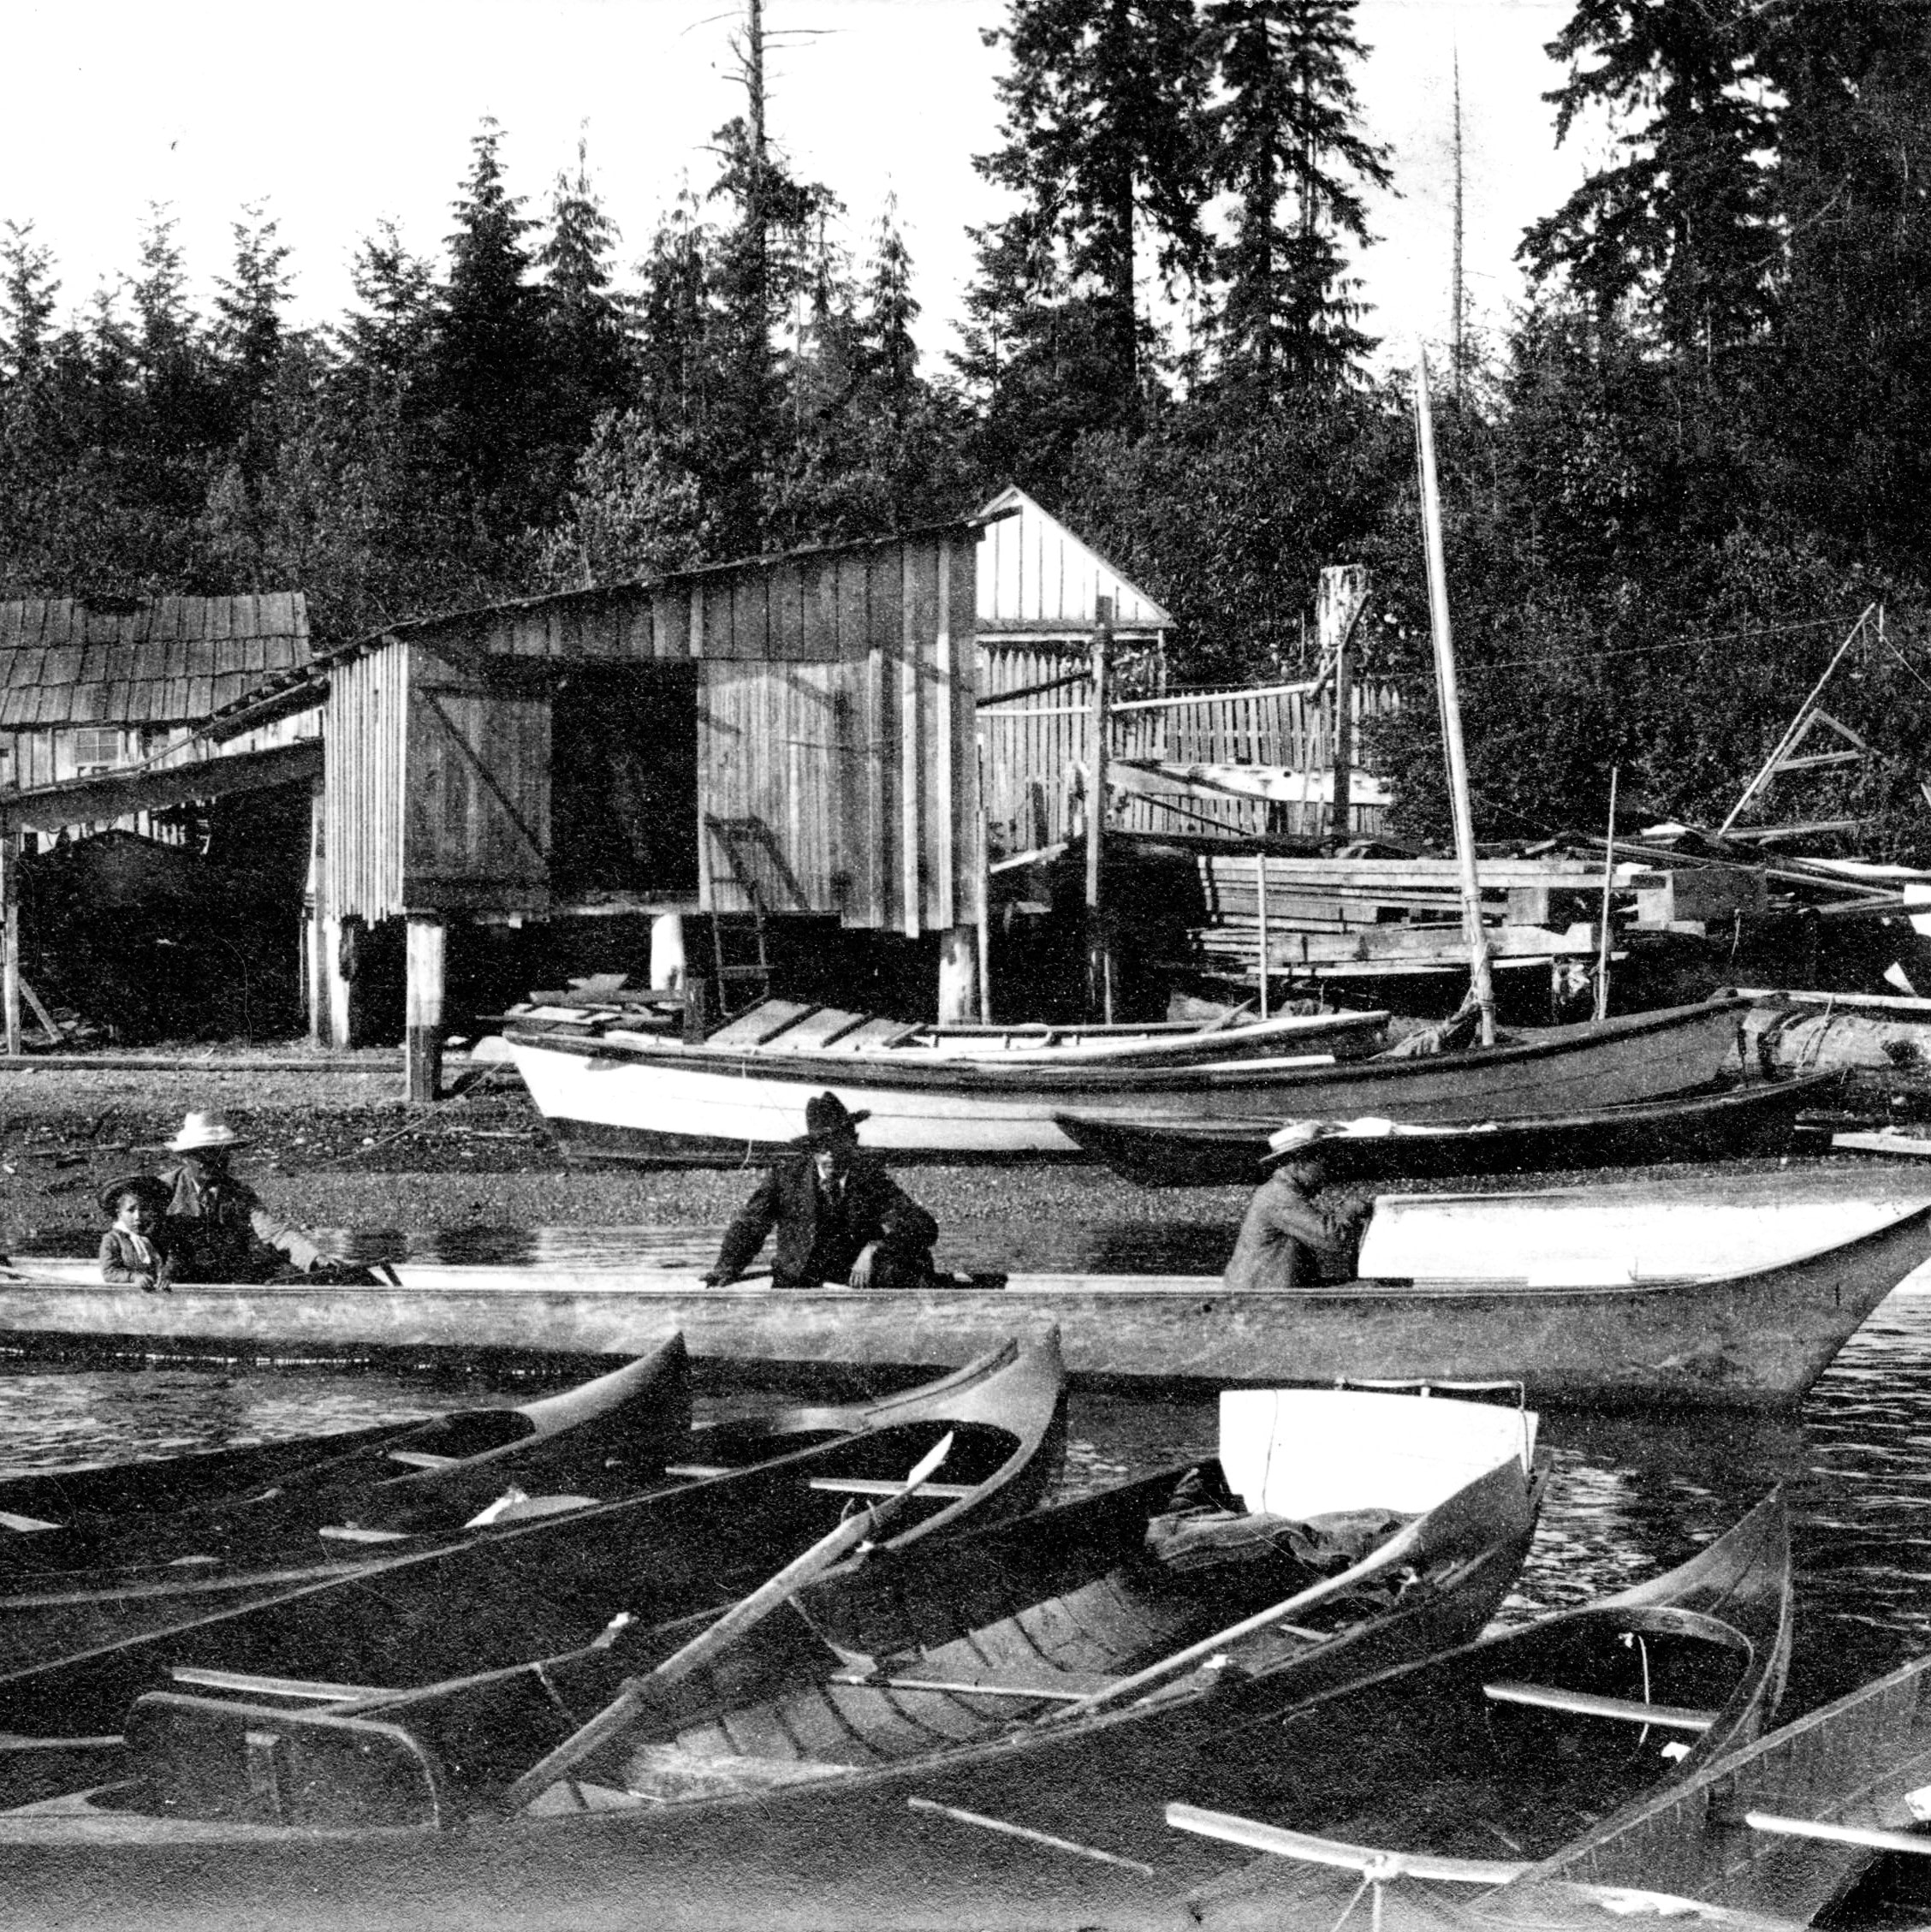 Canoes and a boathouse at Brockton Point 1887 CVA 371 2196 cropped